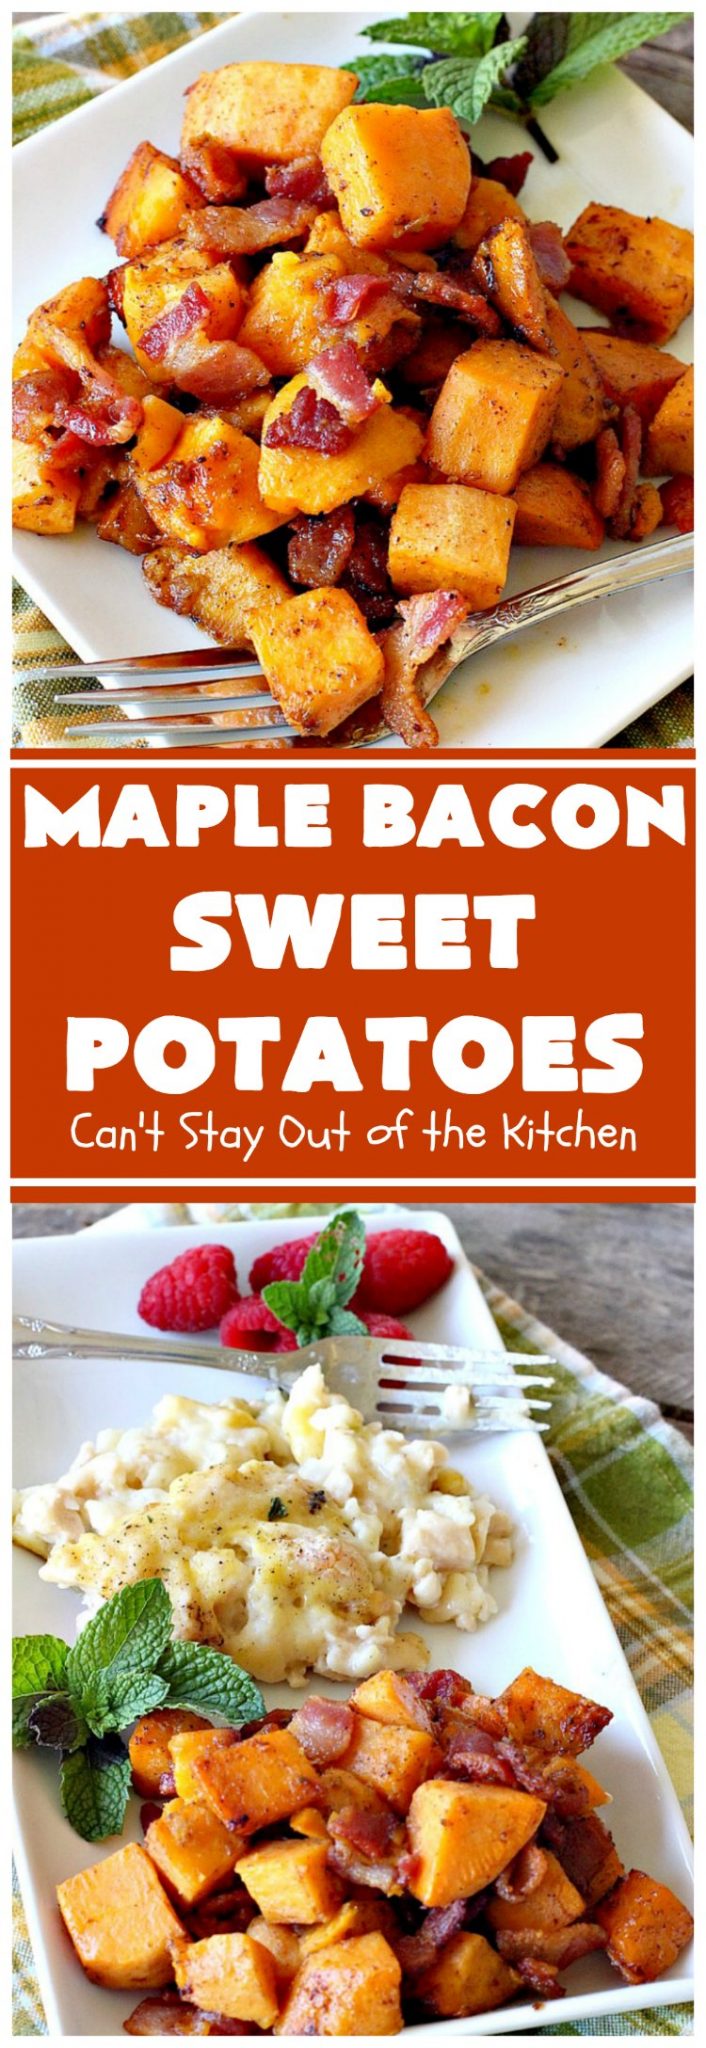 Maple Bacon Sweet Potatoes – Can't Stay Out of the Kitchen